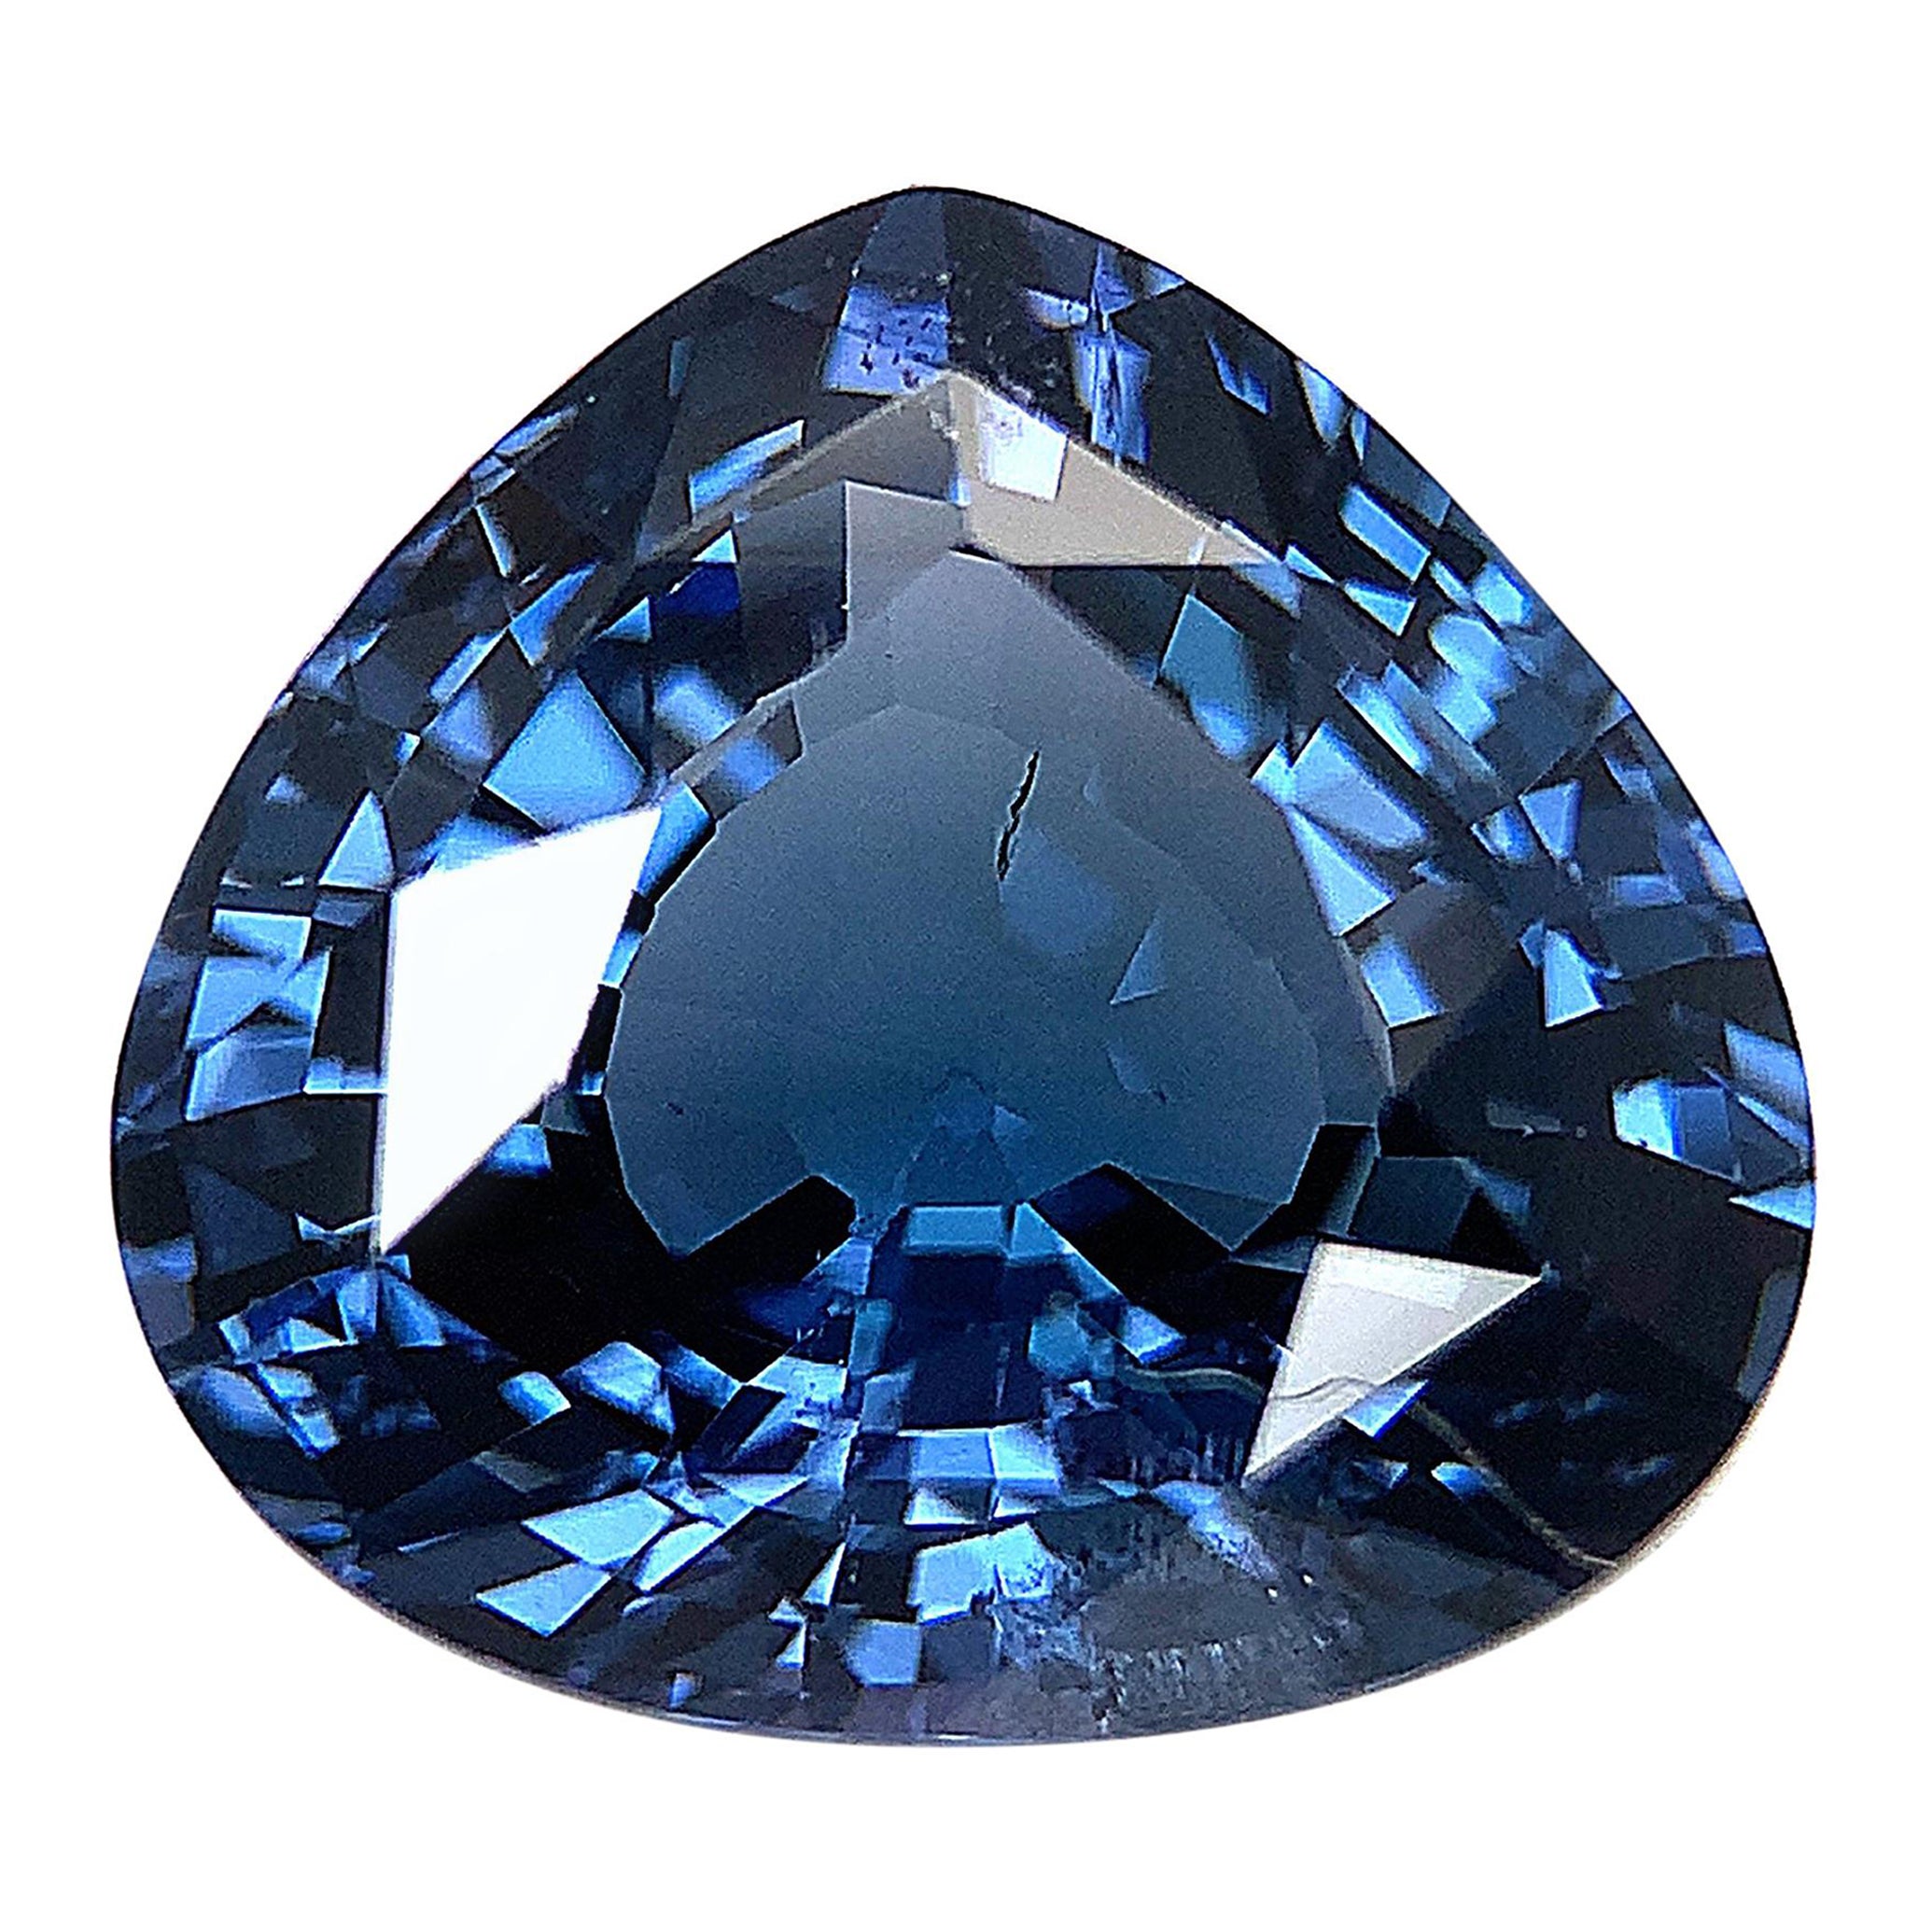 Unheated 5.02 Carat Blue Spinel, Loose Gemstone, GIA Certified ..... A For Sale